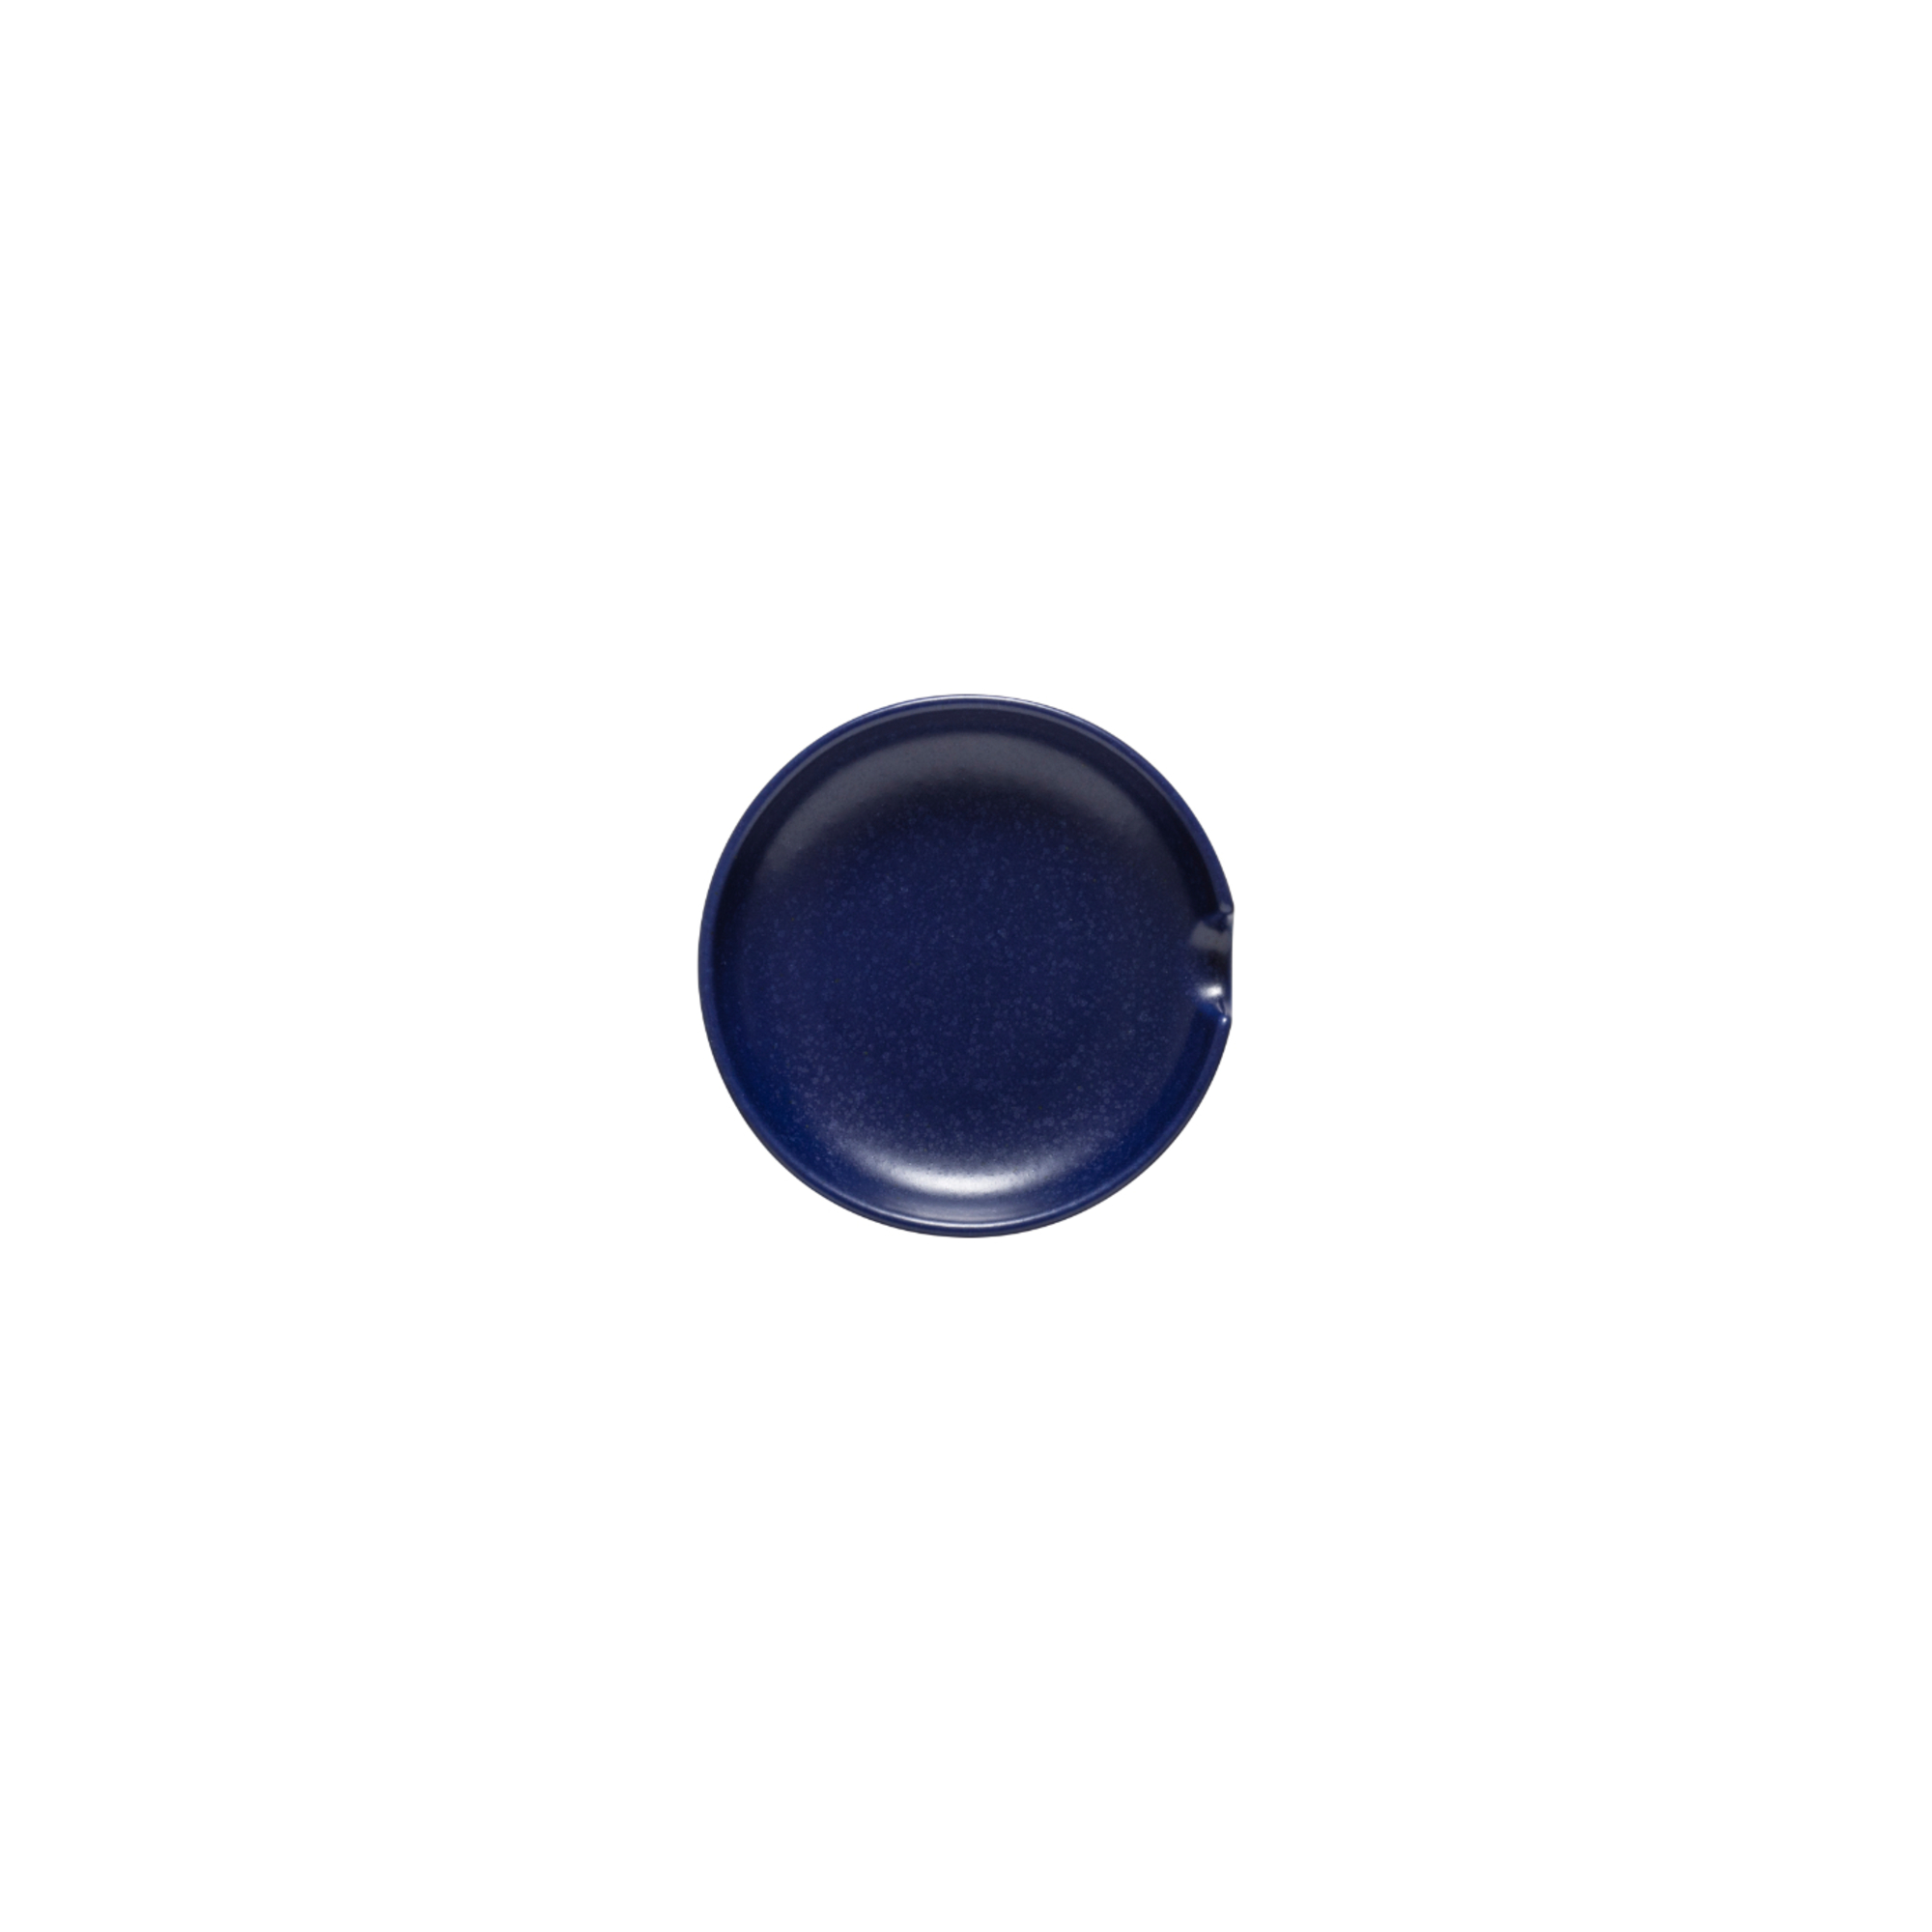 Pacifica Blueberry Spoon Rest 12cm Gift